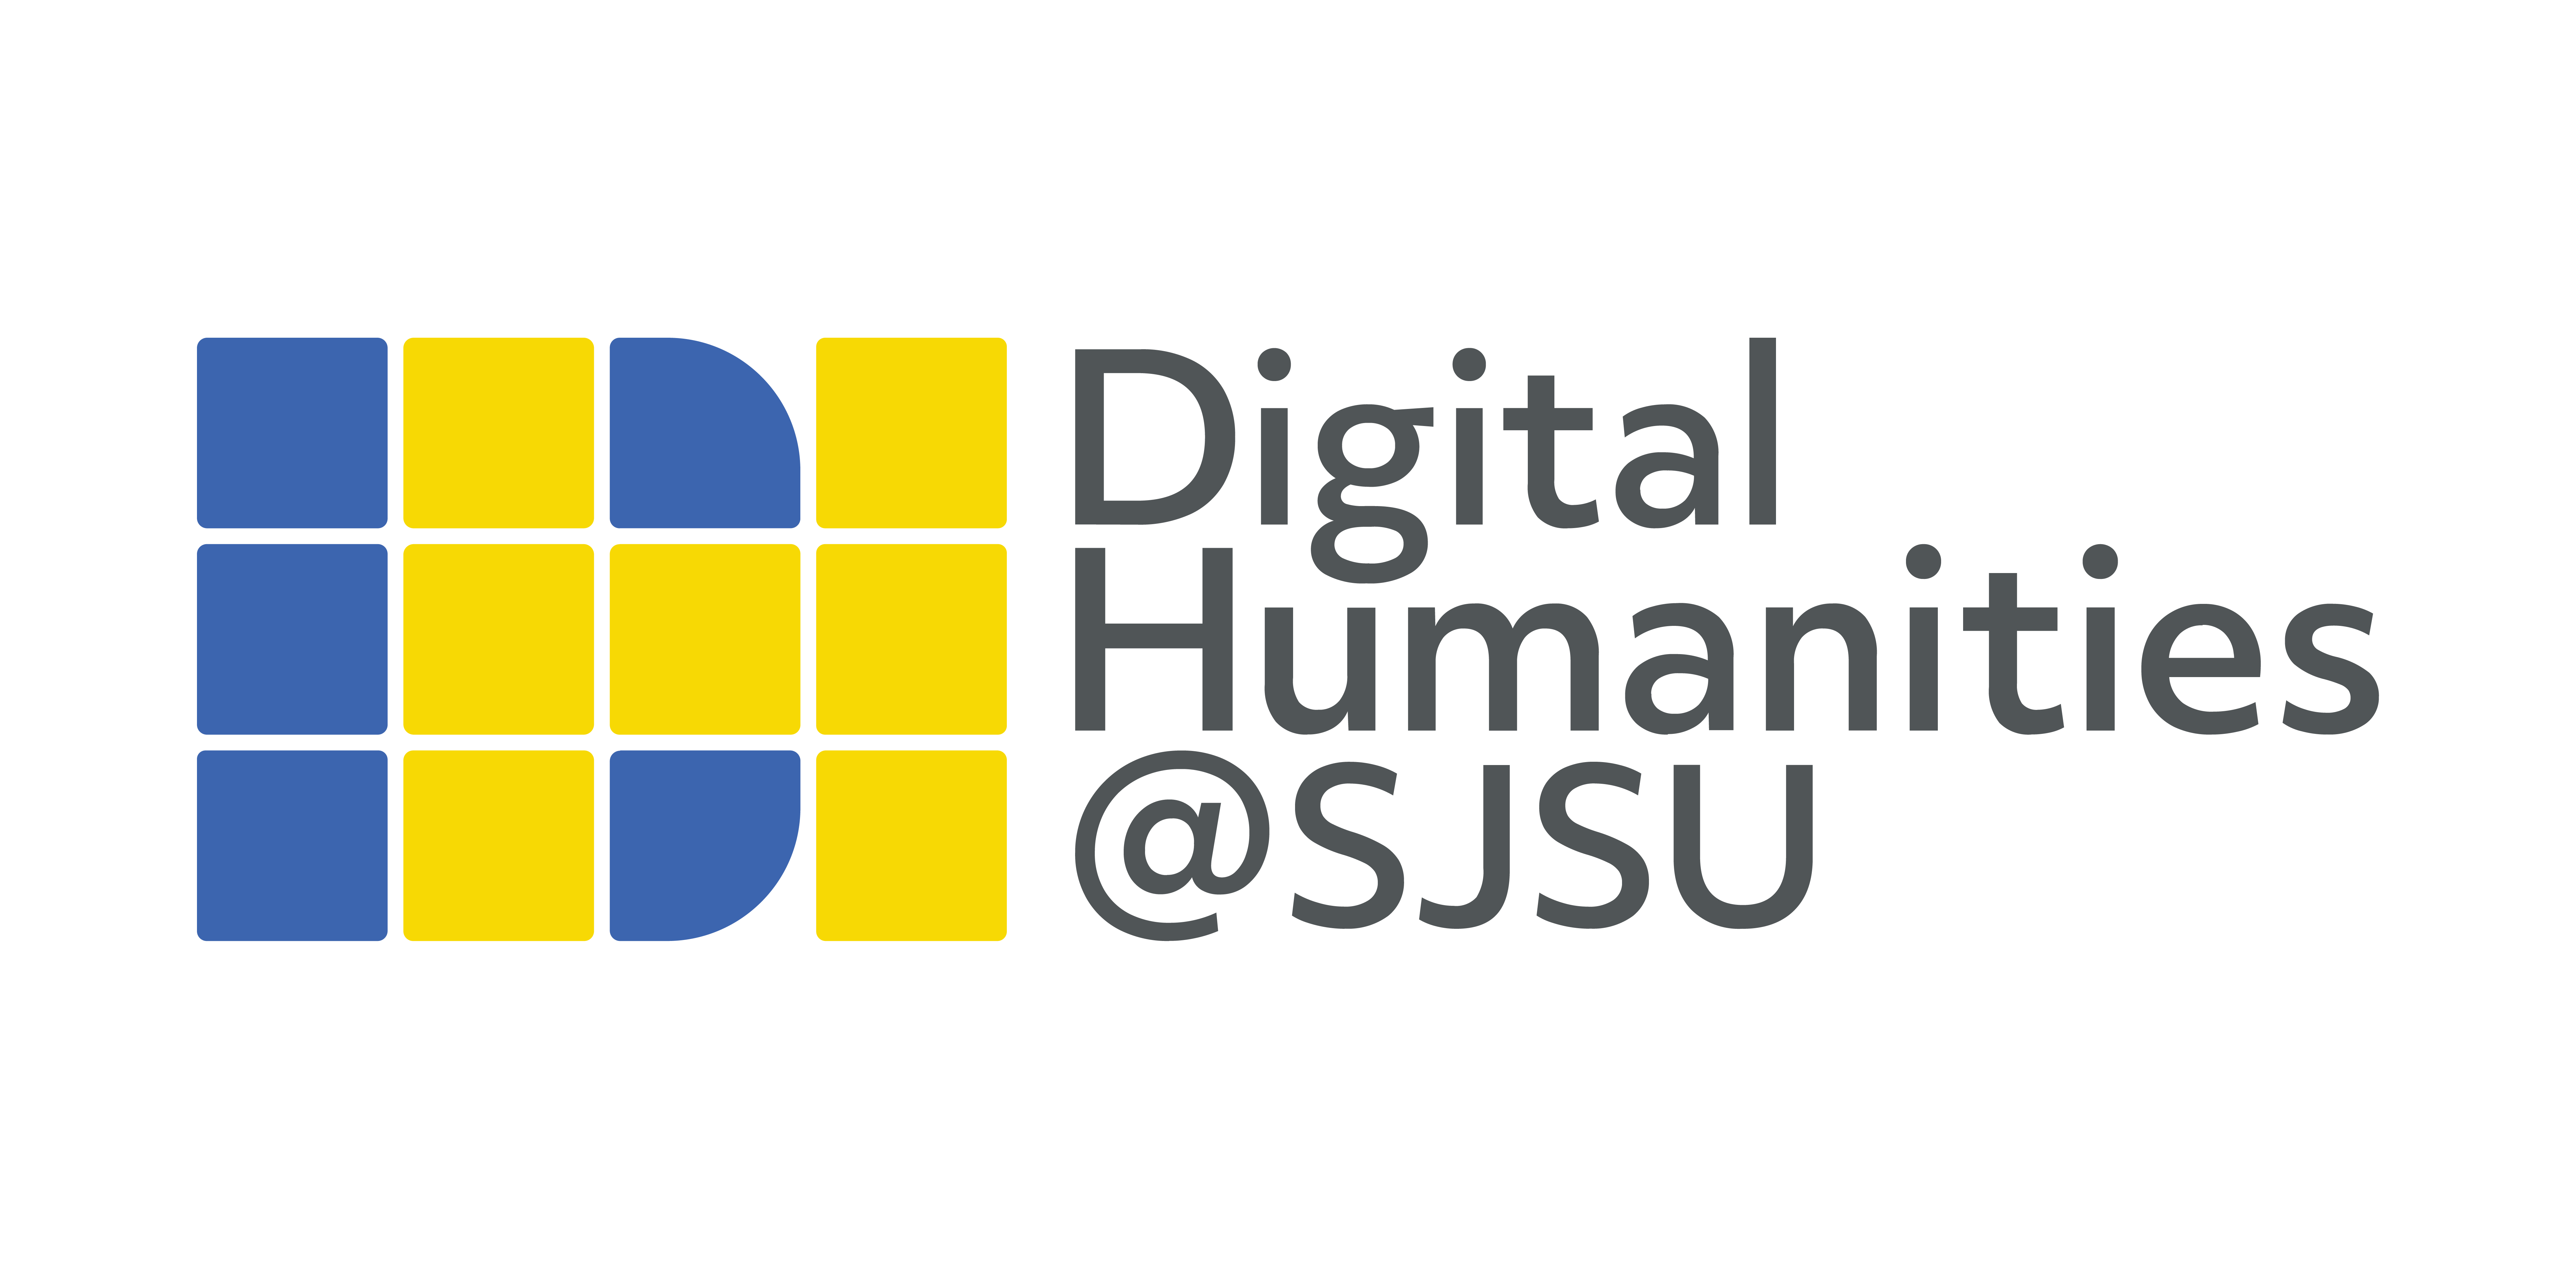 digital humanities at sjsu spelled out in gold and blue blocks